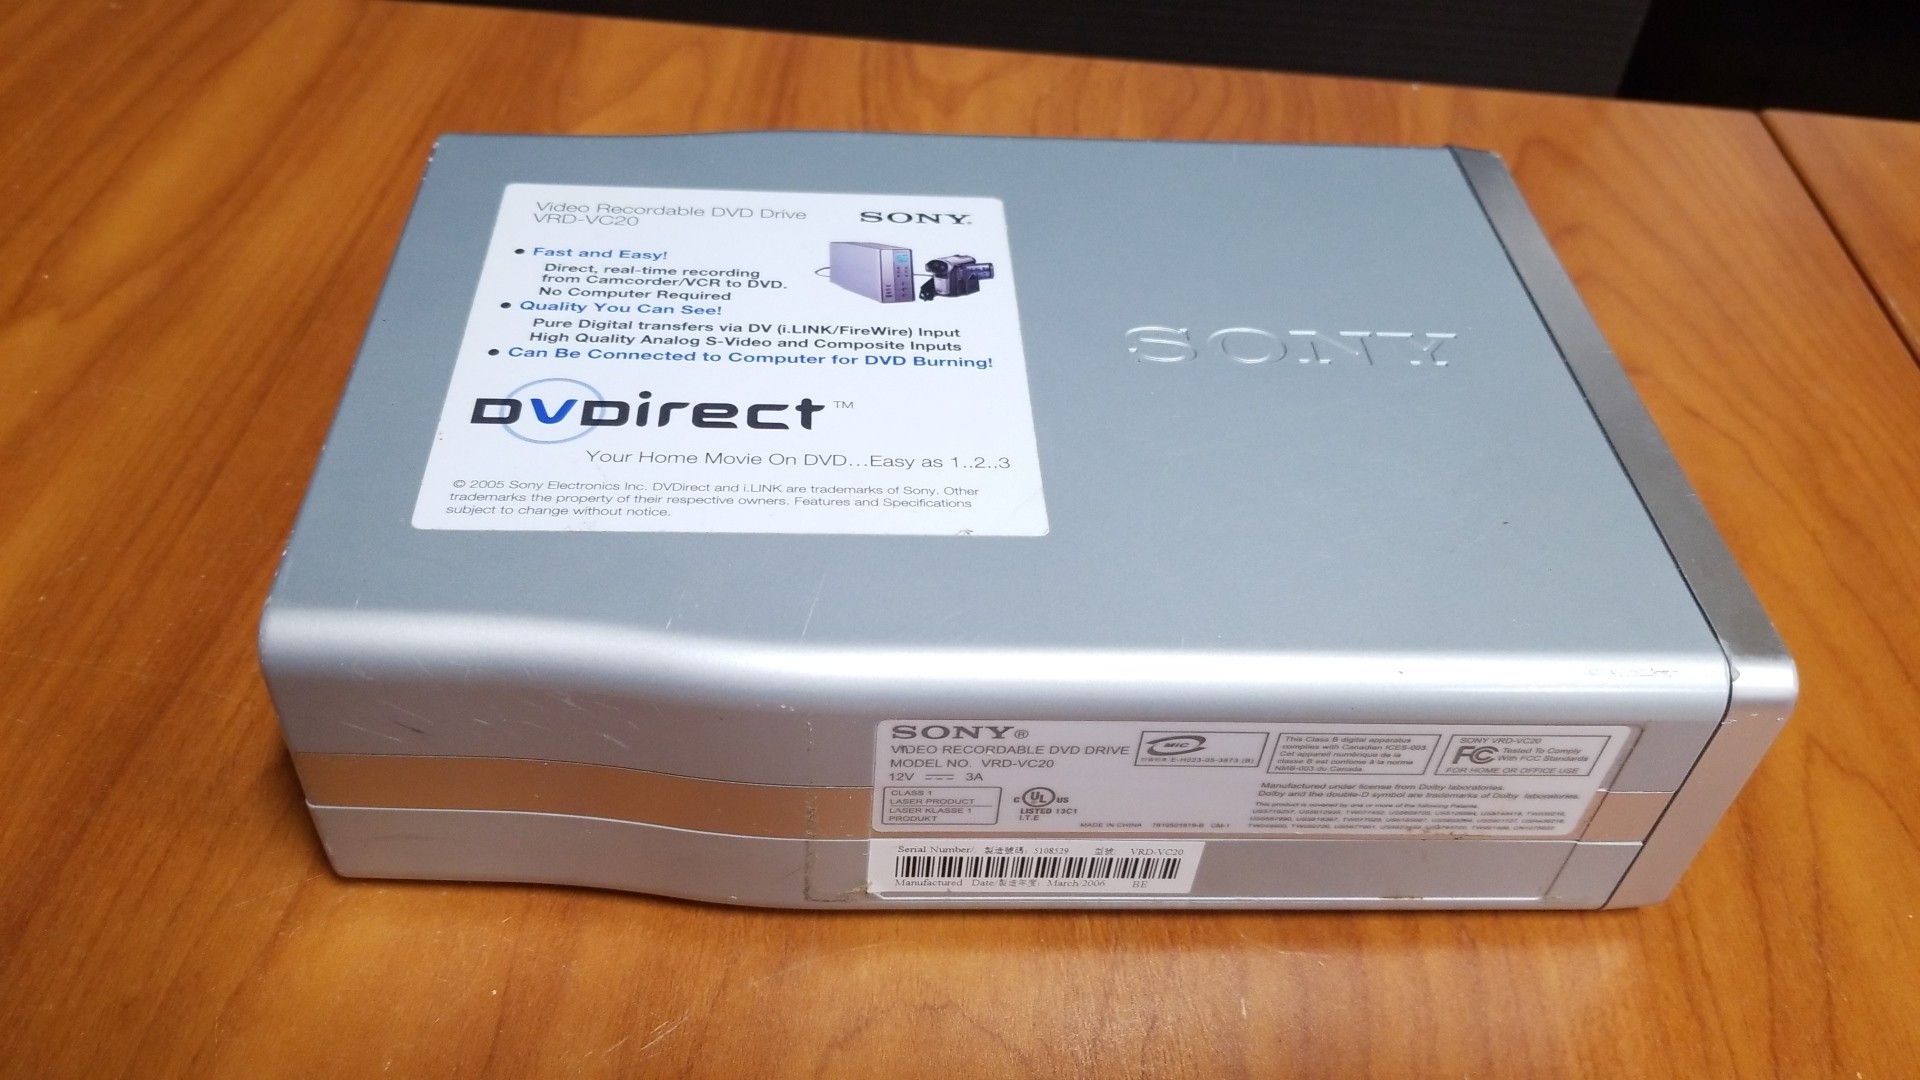 Sony Video Recordable DVD Drive- VRD-VC20